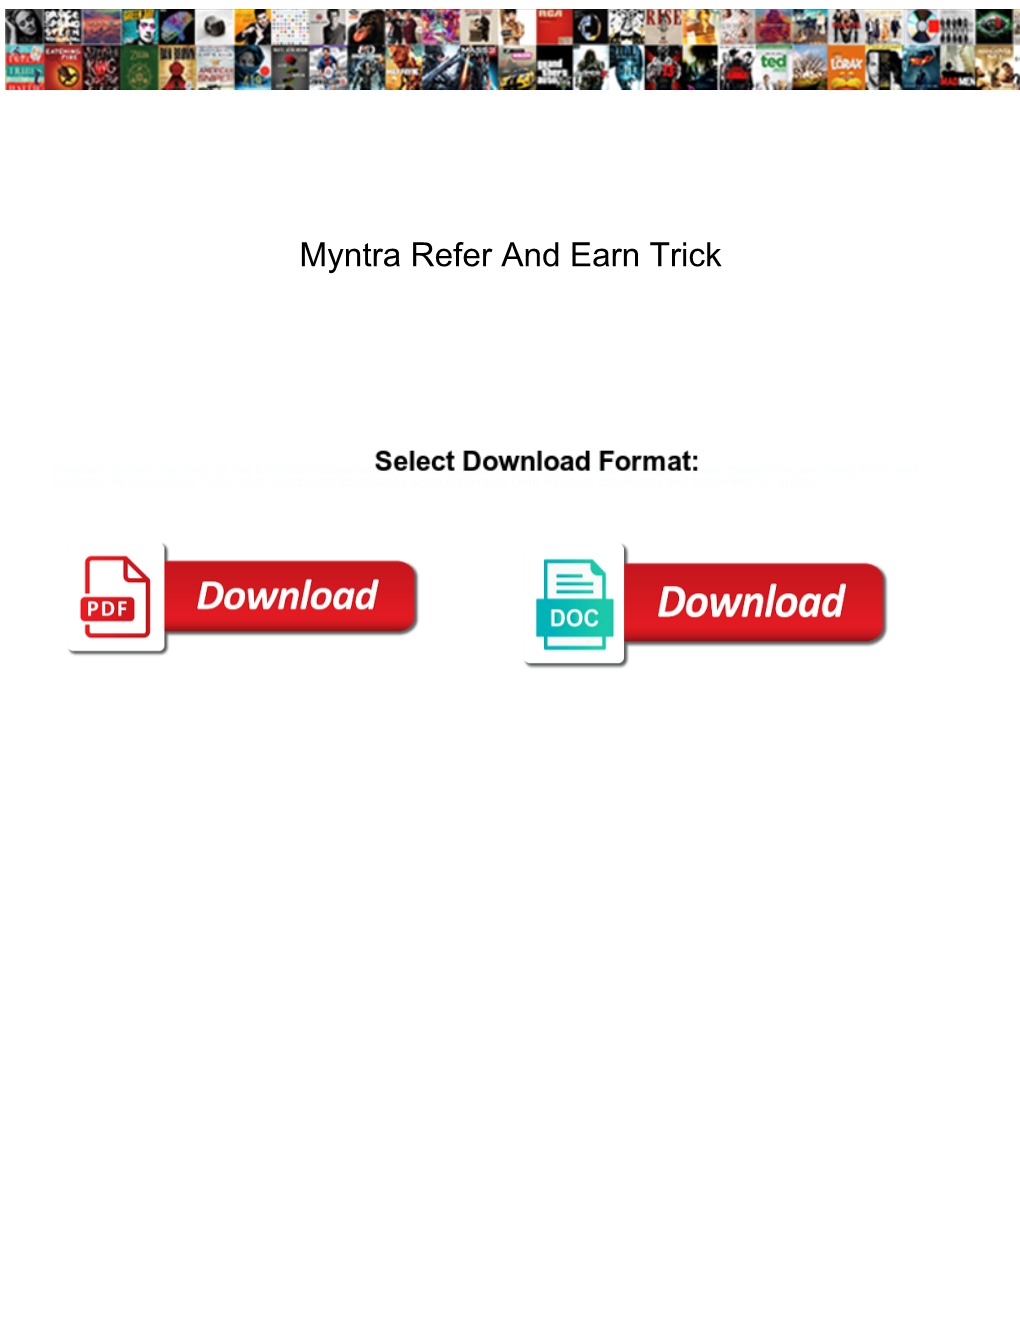 Myntra Refer and Earn Trick